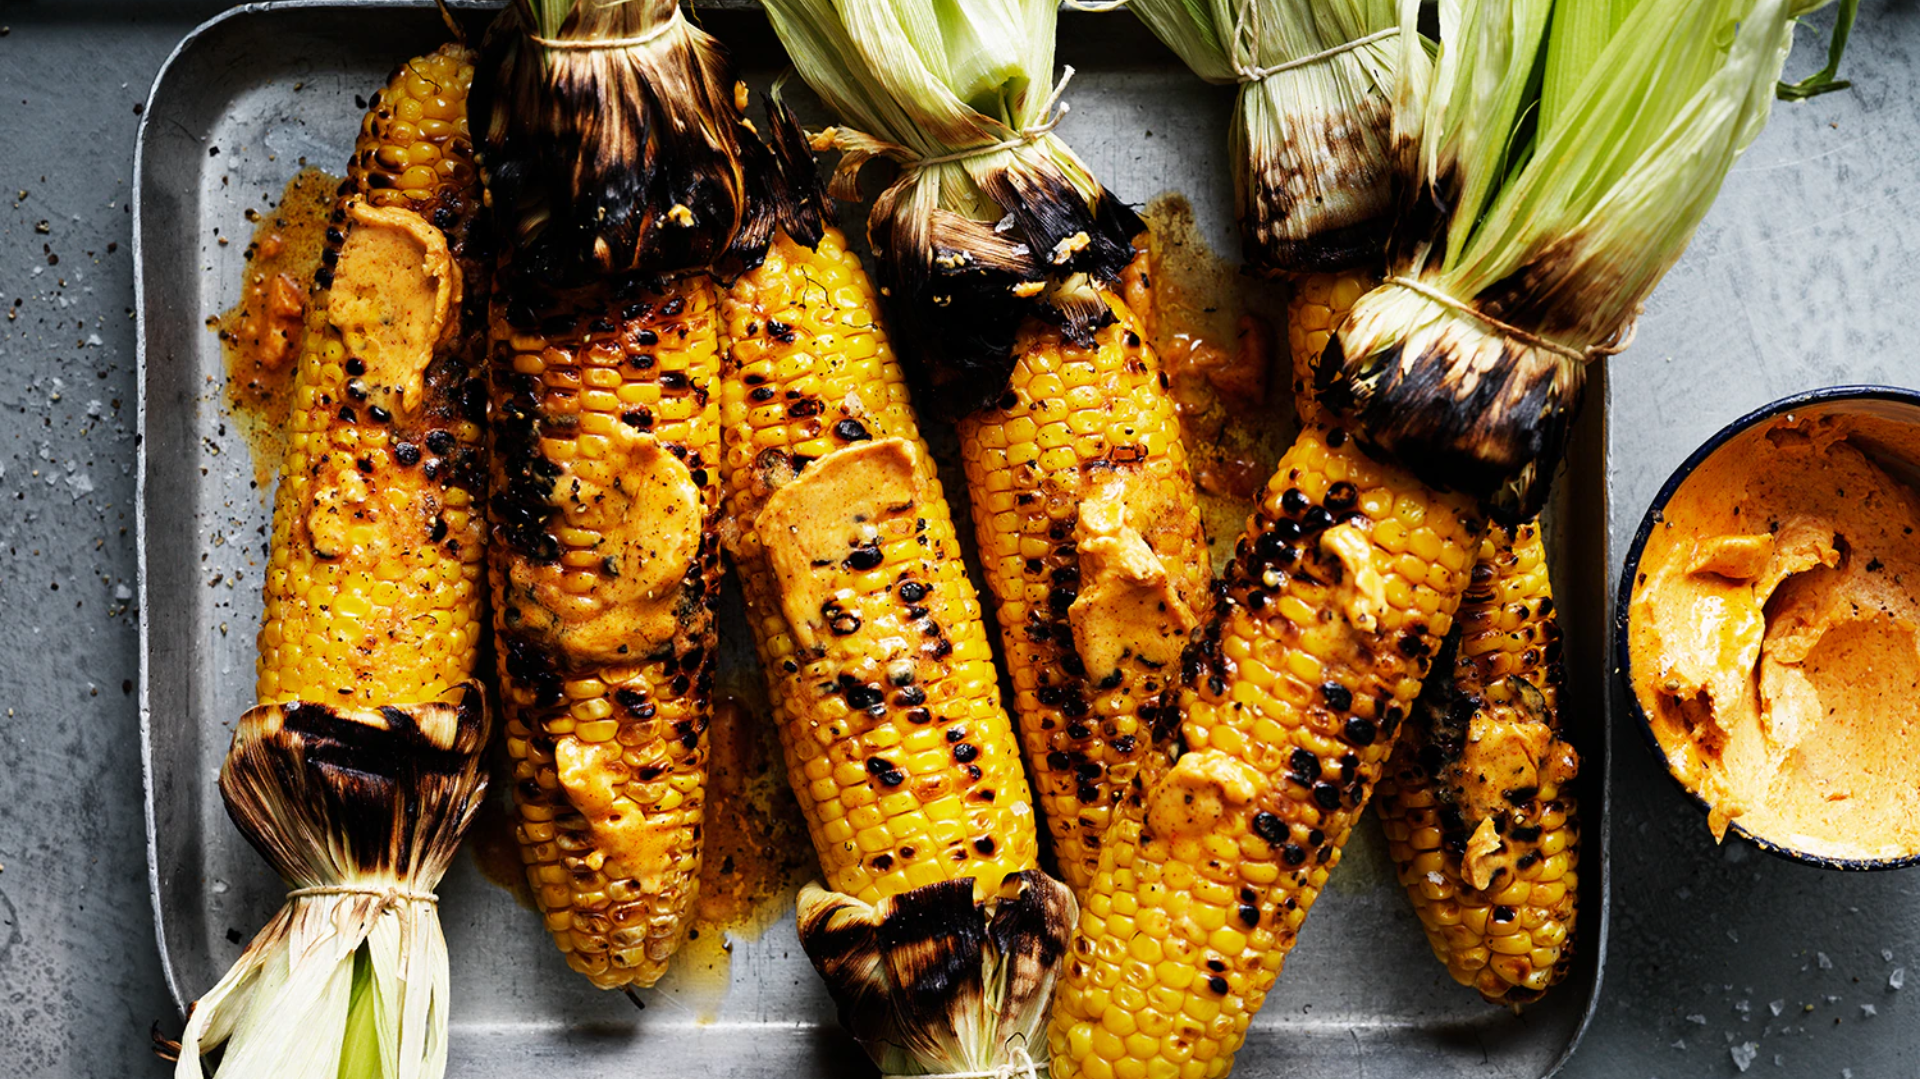 Corn on the Cob in Foil on Grill